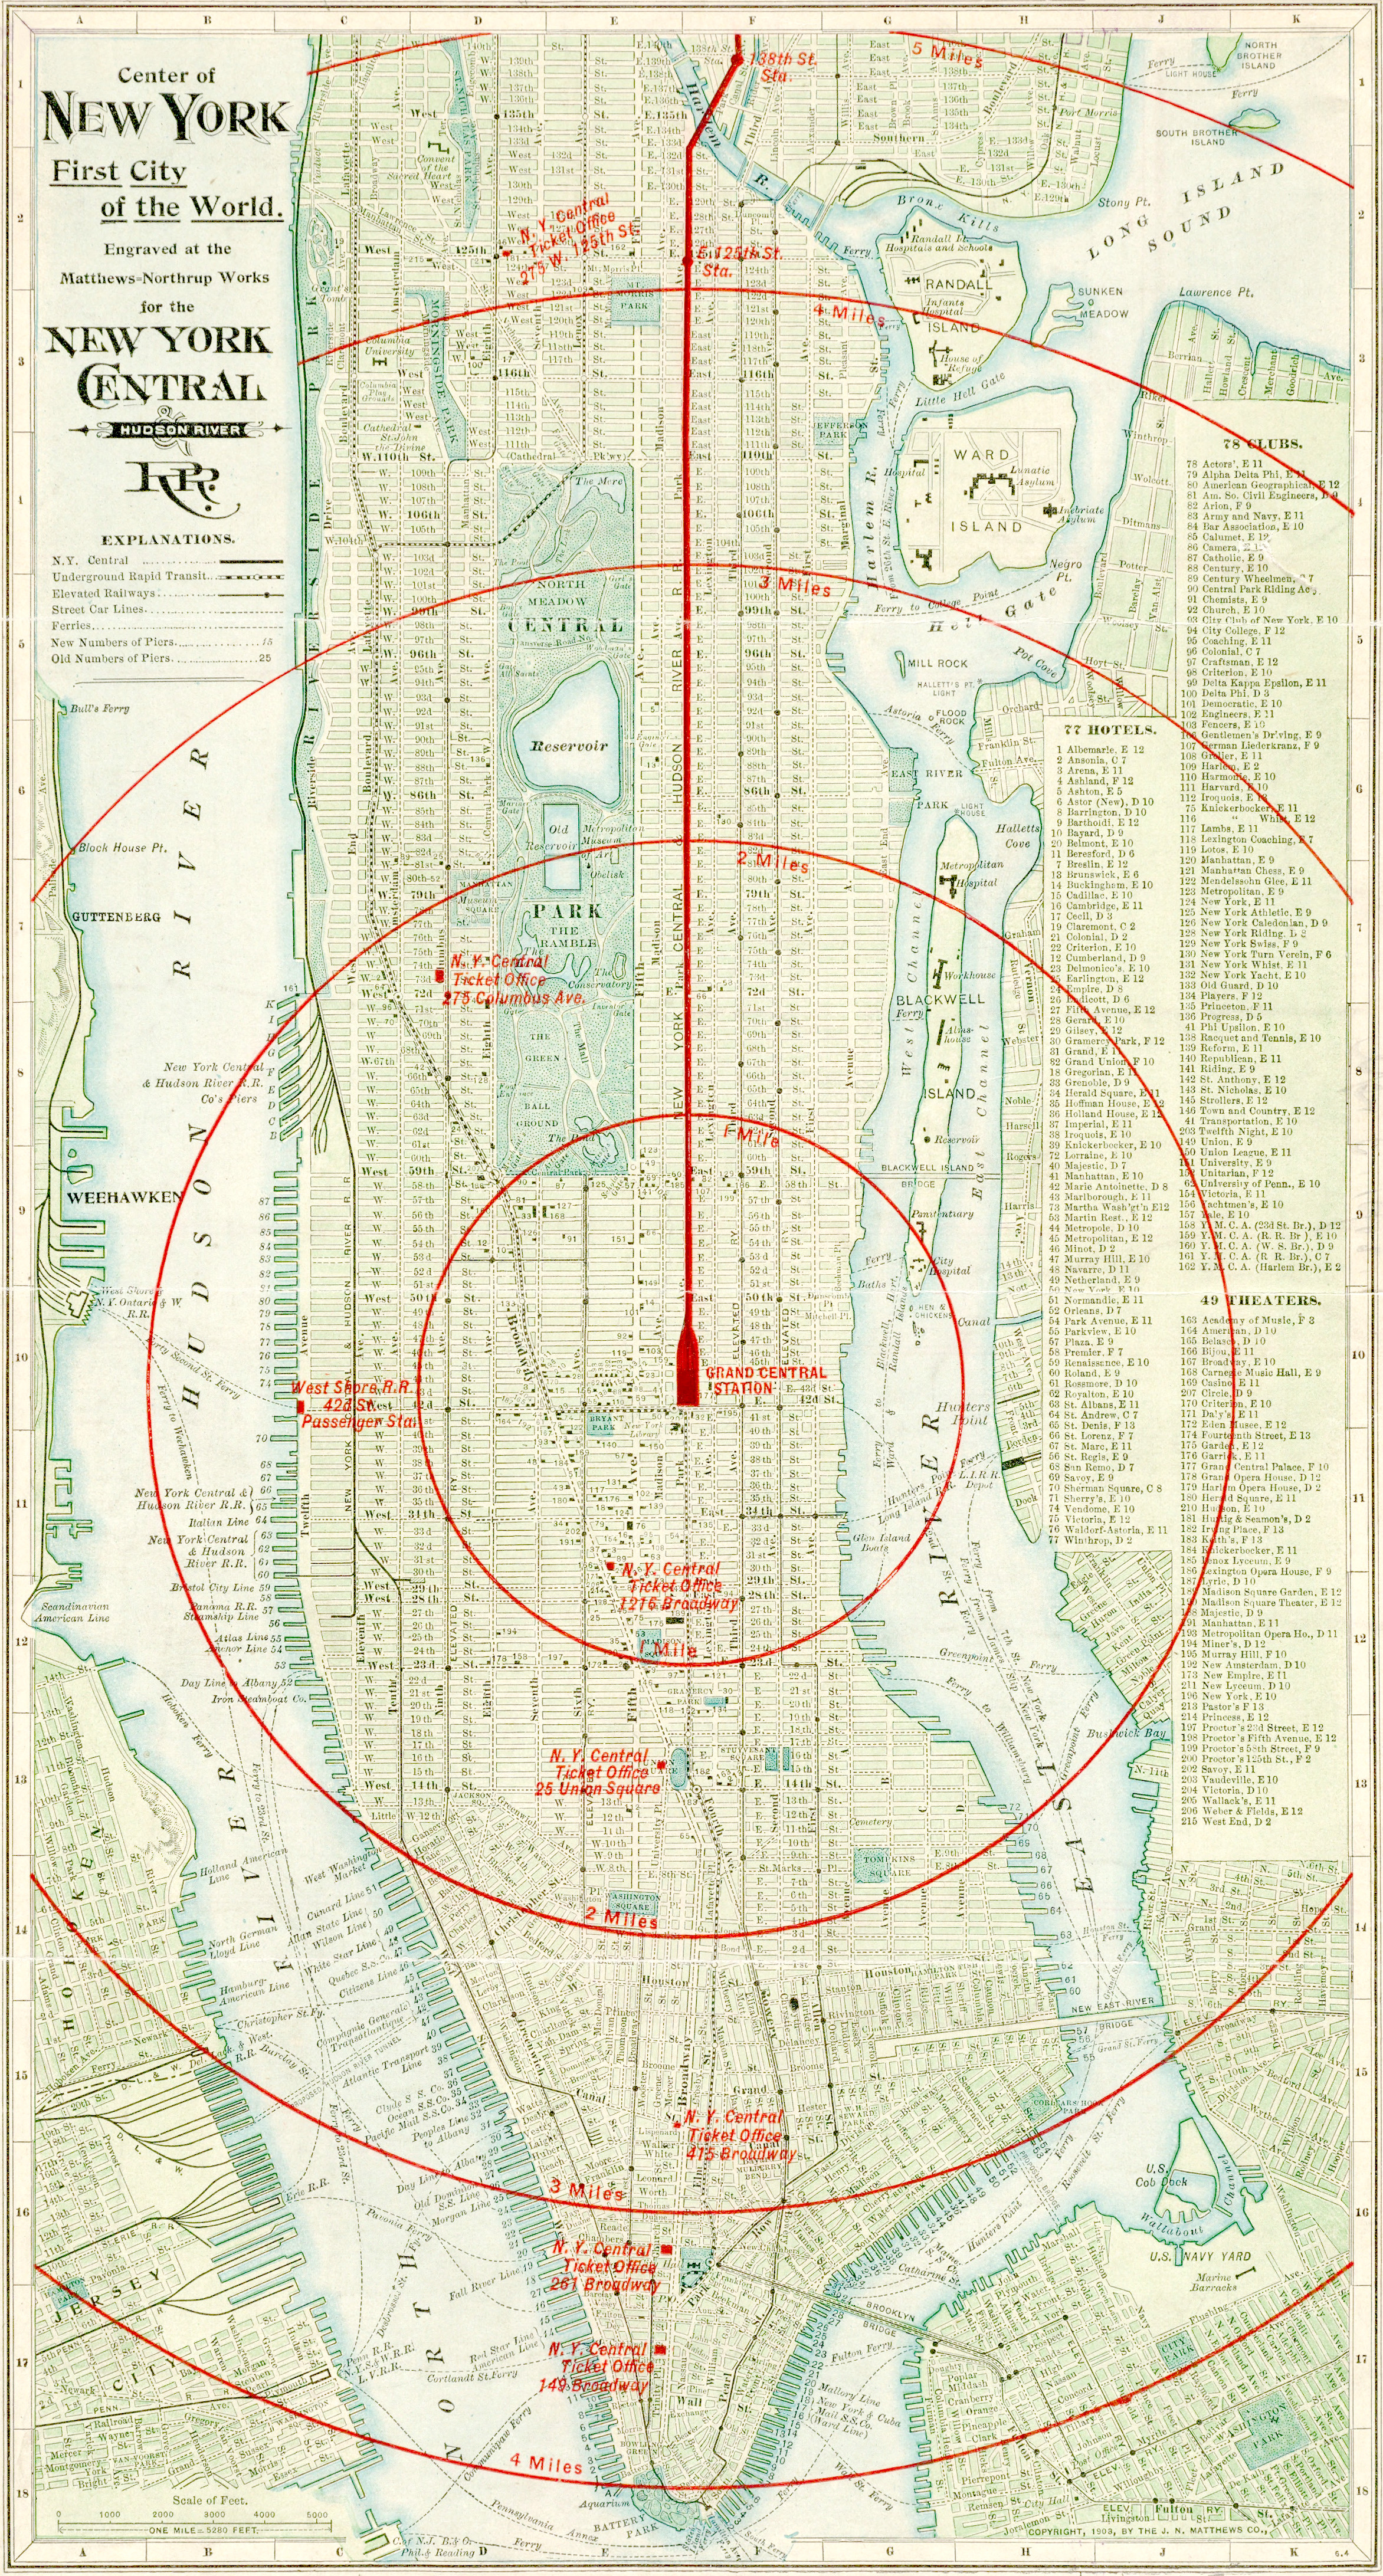 New York City A Map Of The Center Of The World In 1902 Knowol